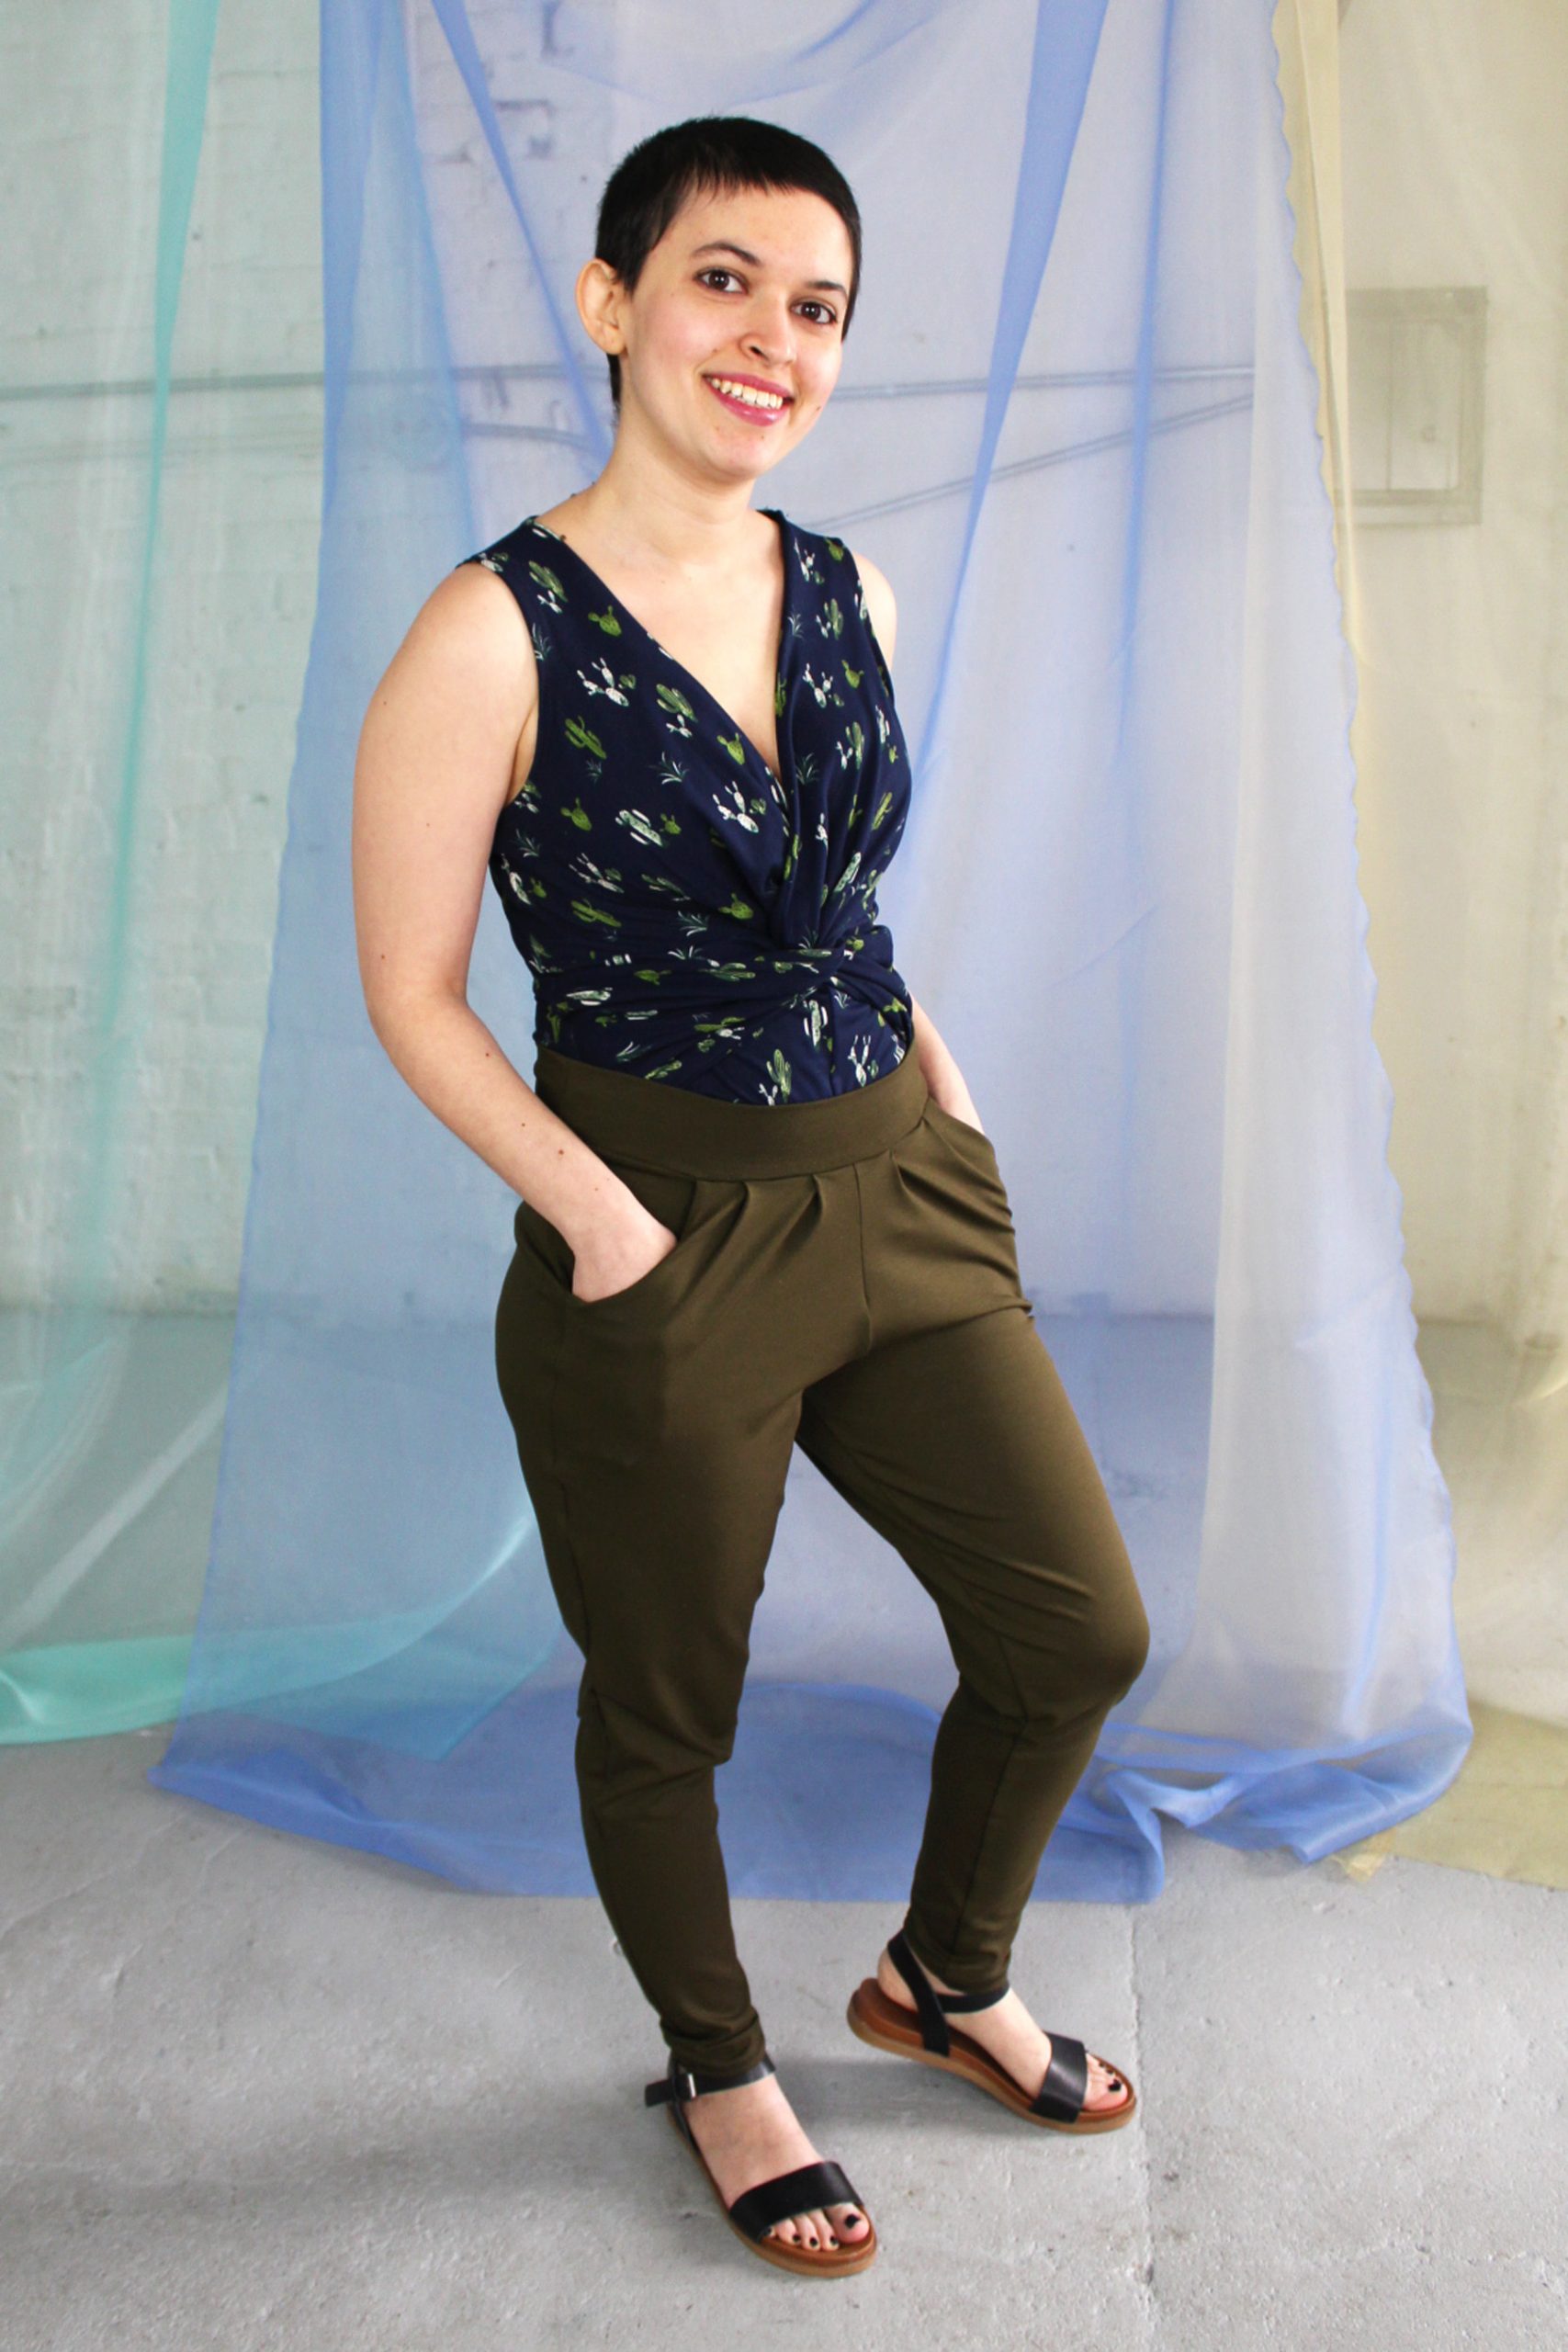 White petite straight size non binary model with brunette pixie haircut wearing navy cactus print tank and olive green pants